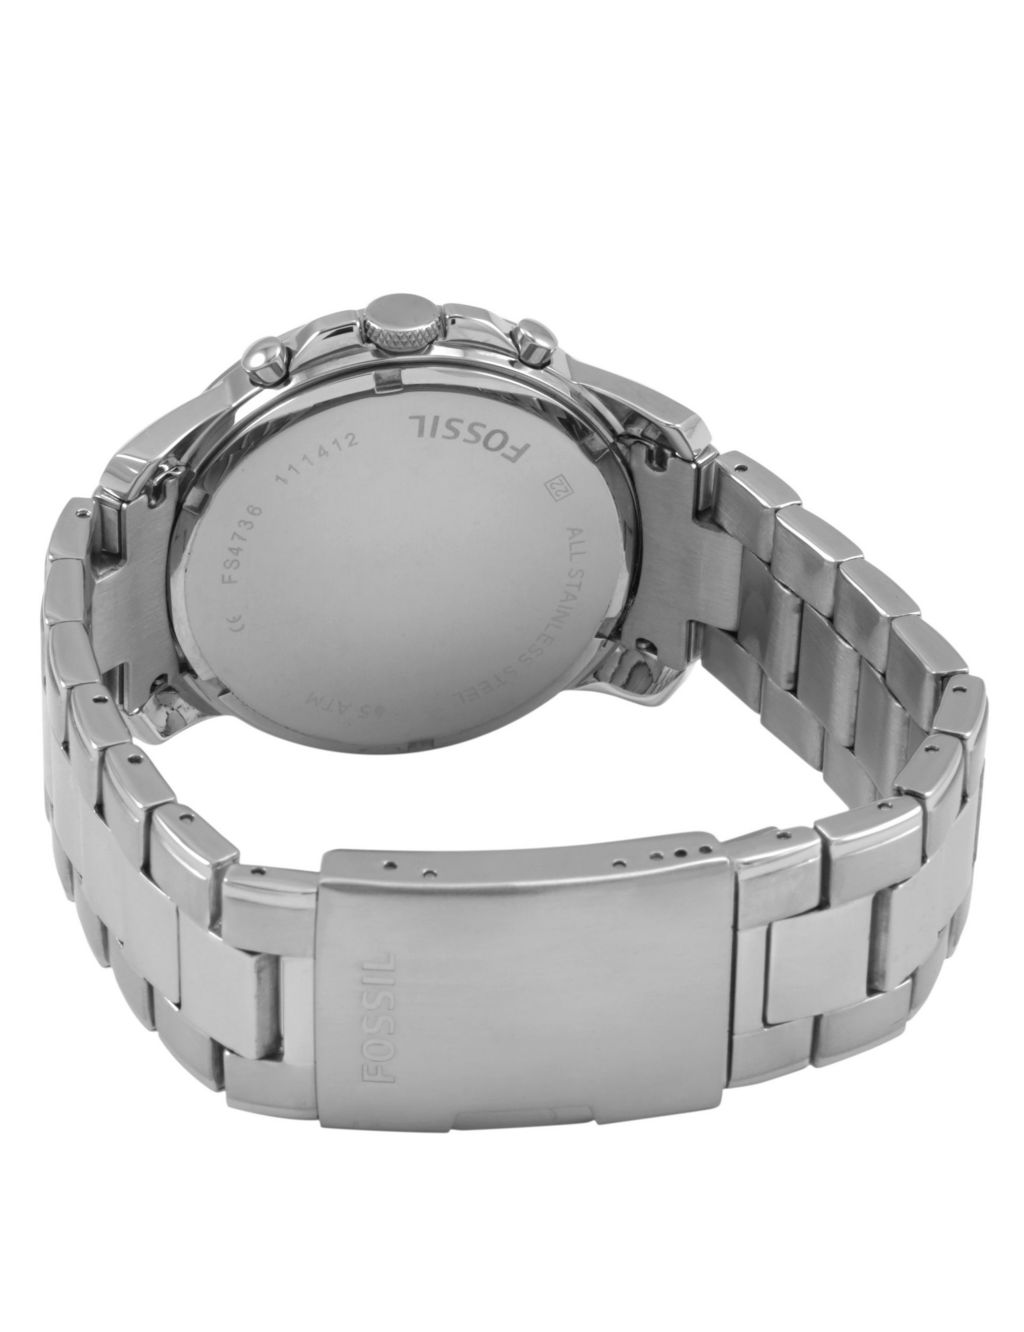 Fossil Grant Chronograph Silver Stainless Steel Watch image 3